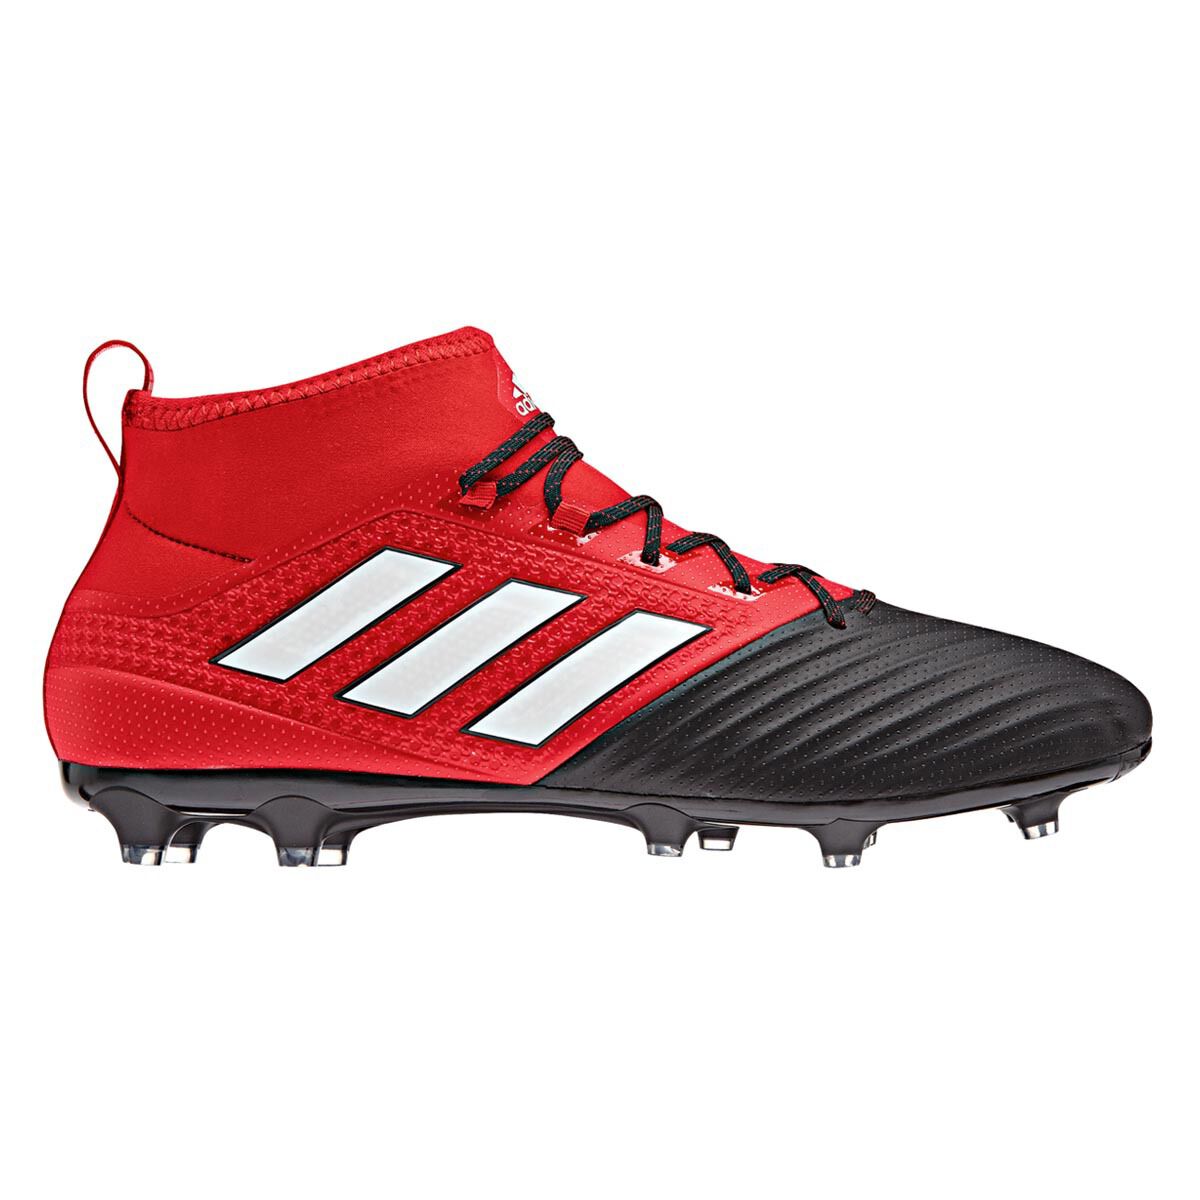 adidas 17.2 soccer cleats